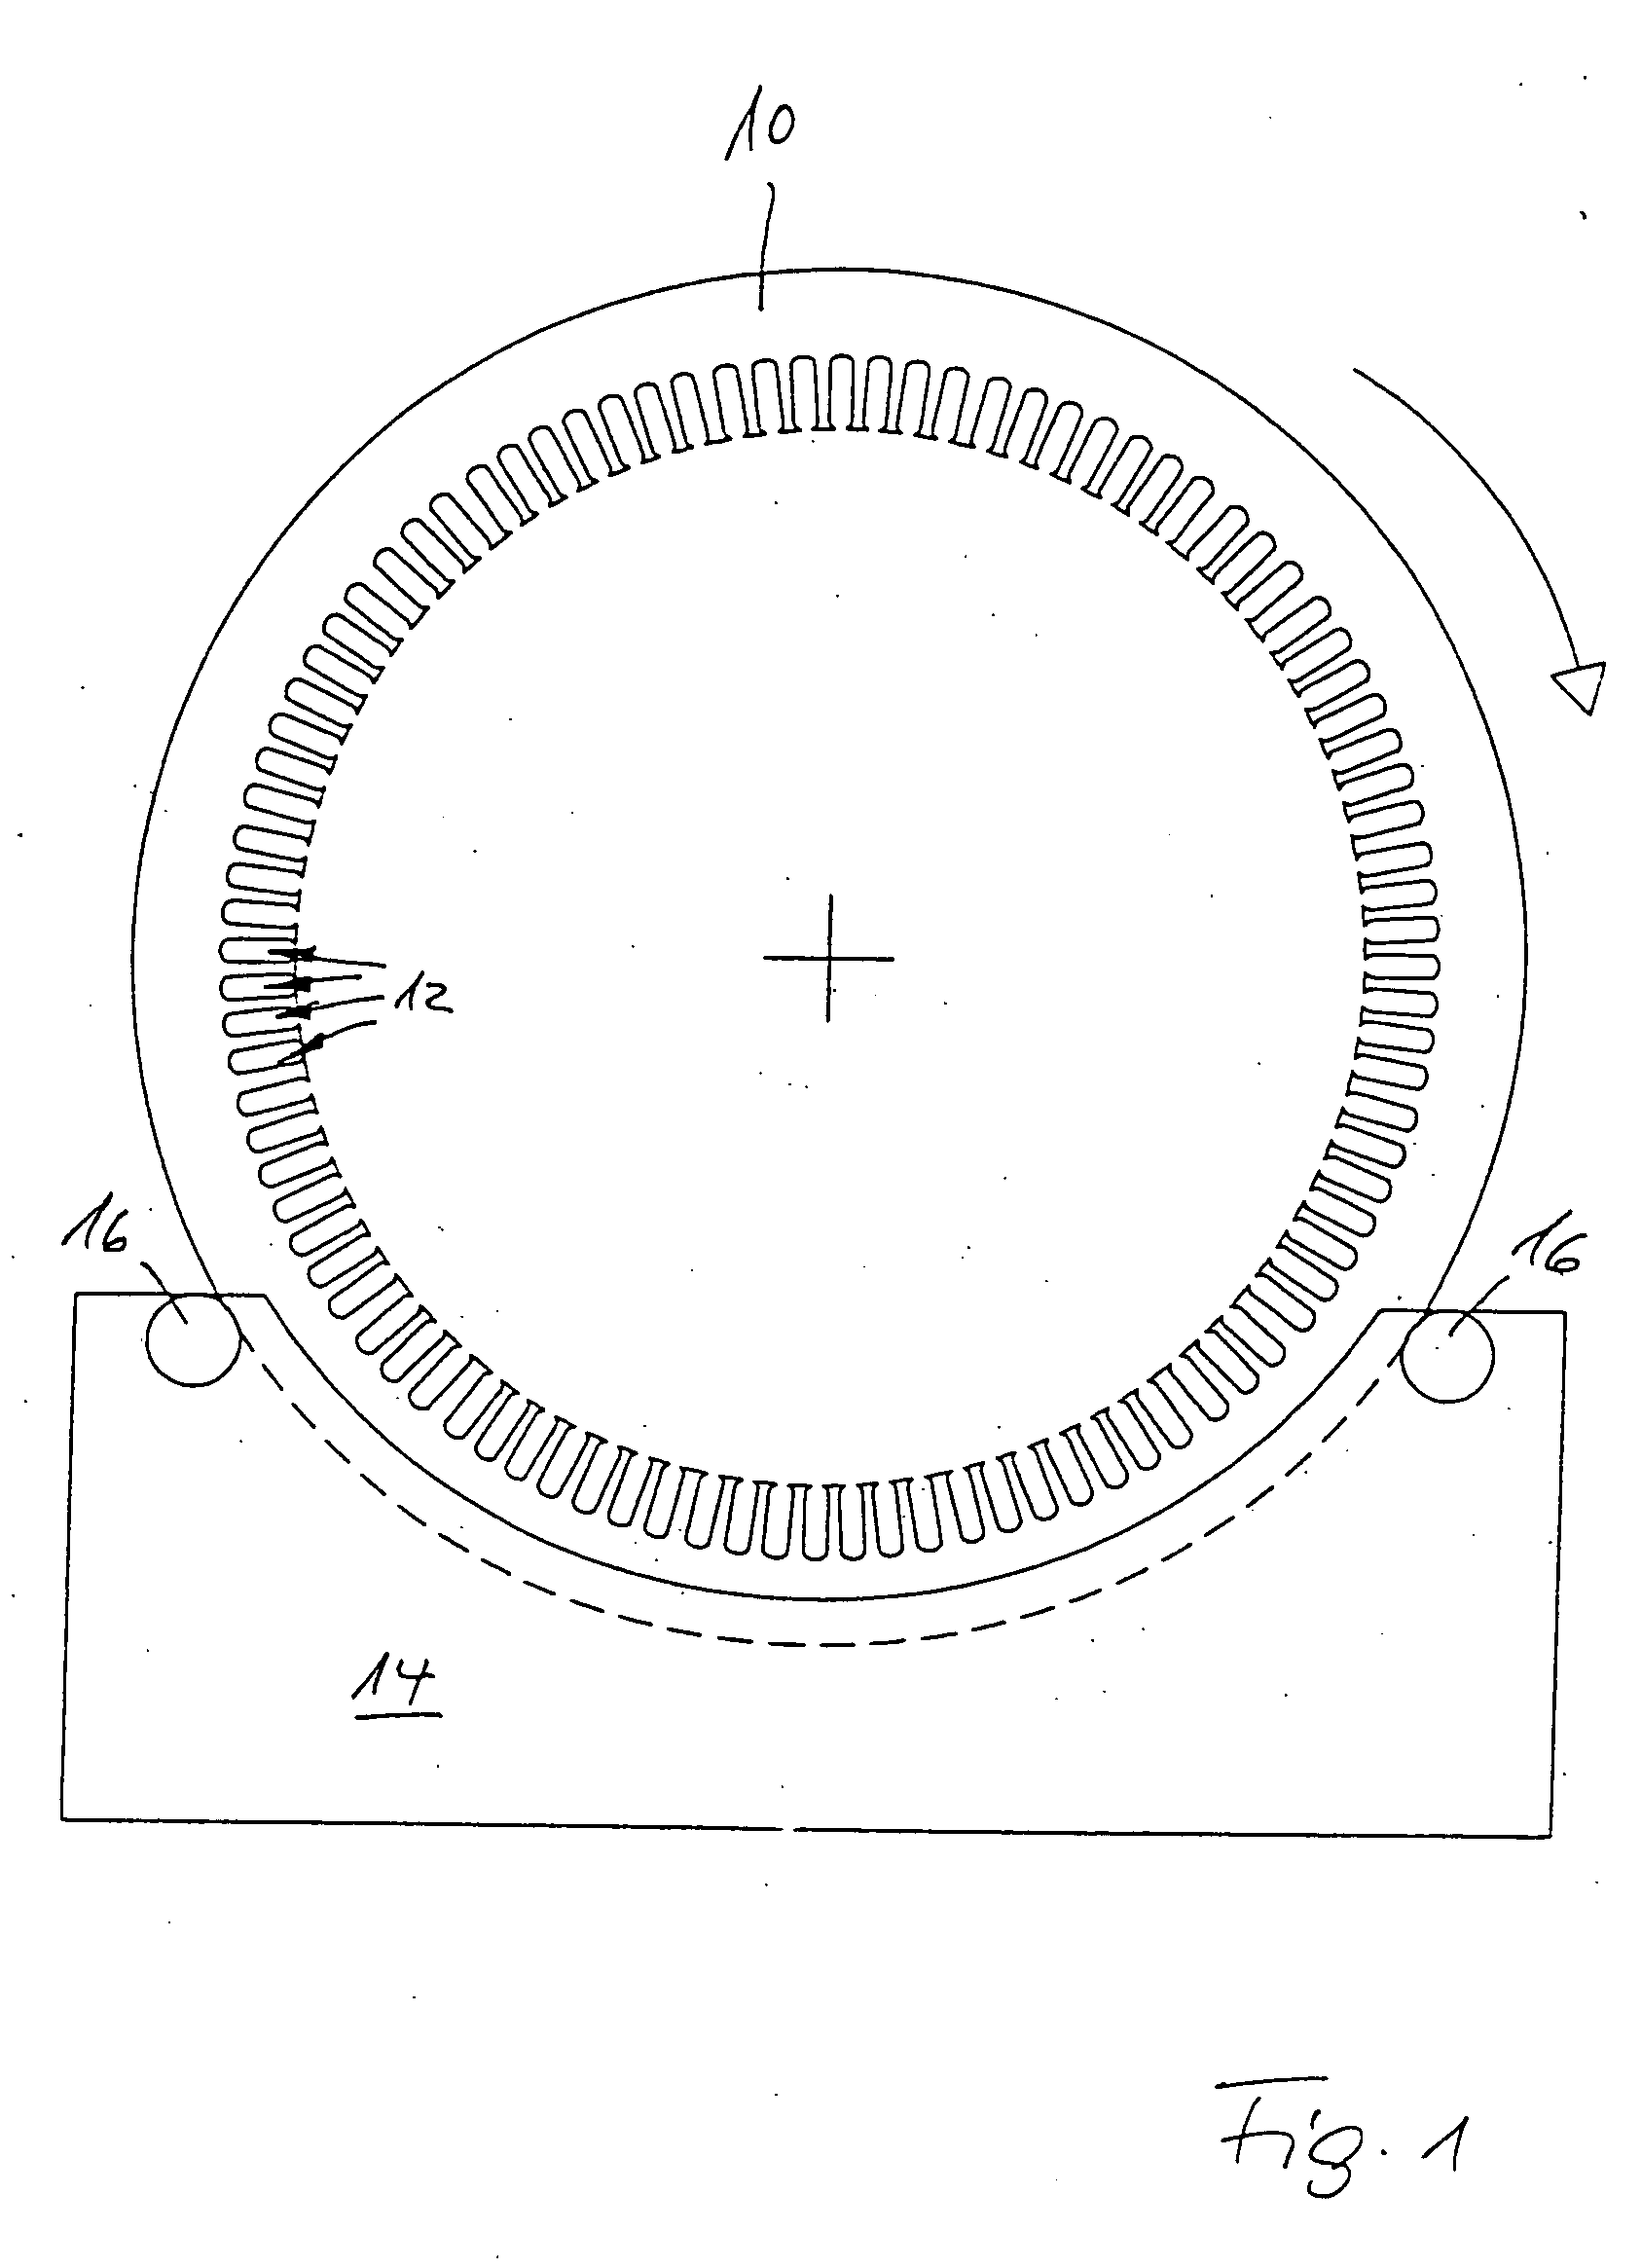 Wind-energy installation comprising a ring generator